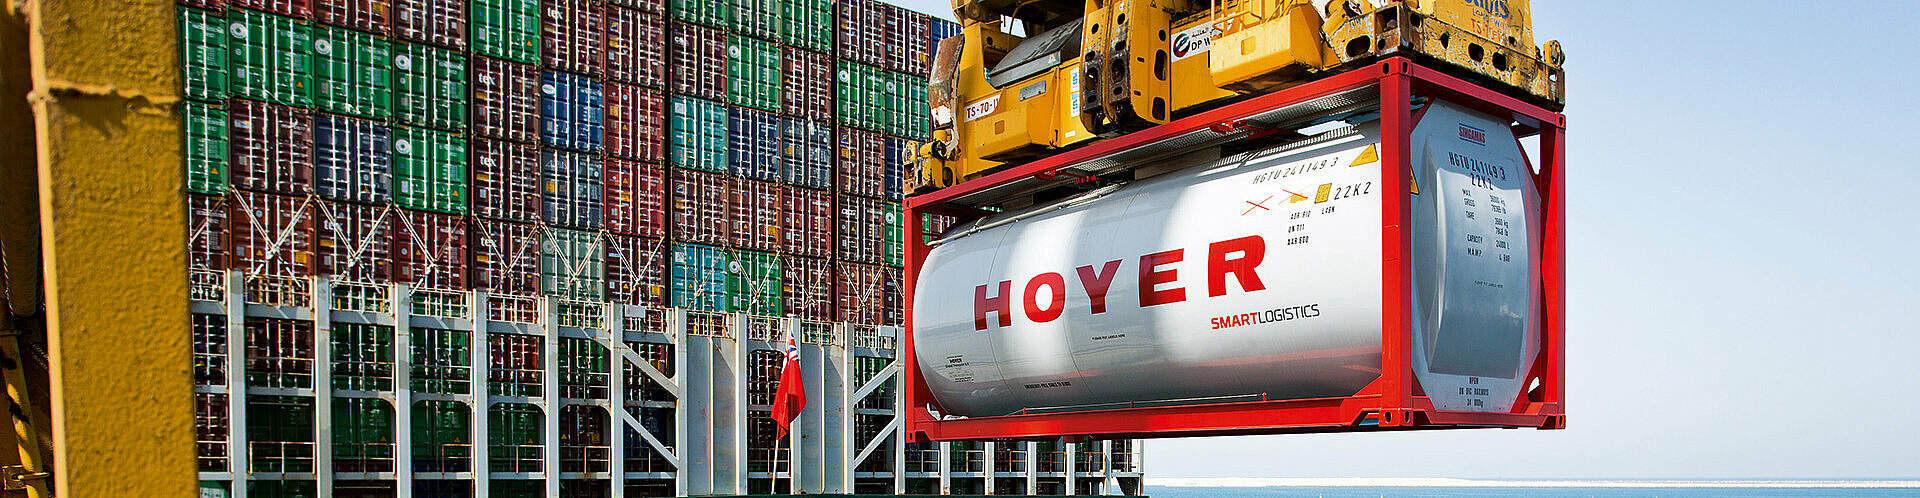 HOYER container smart logistics on a crane at the harbour, ship in the background